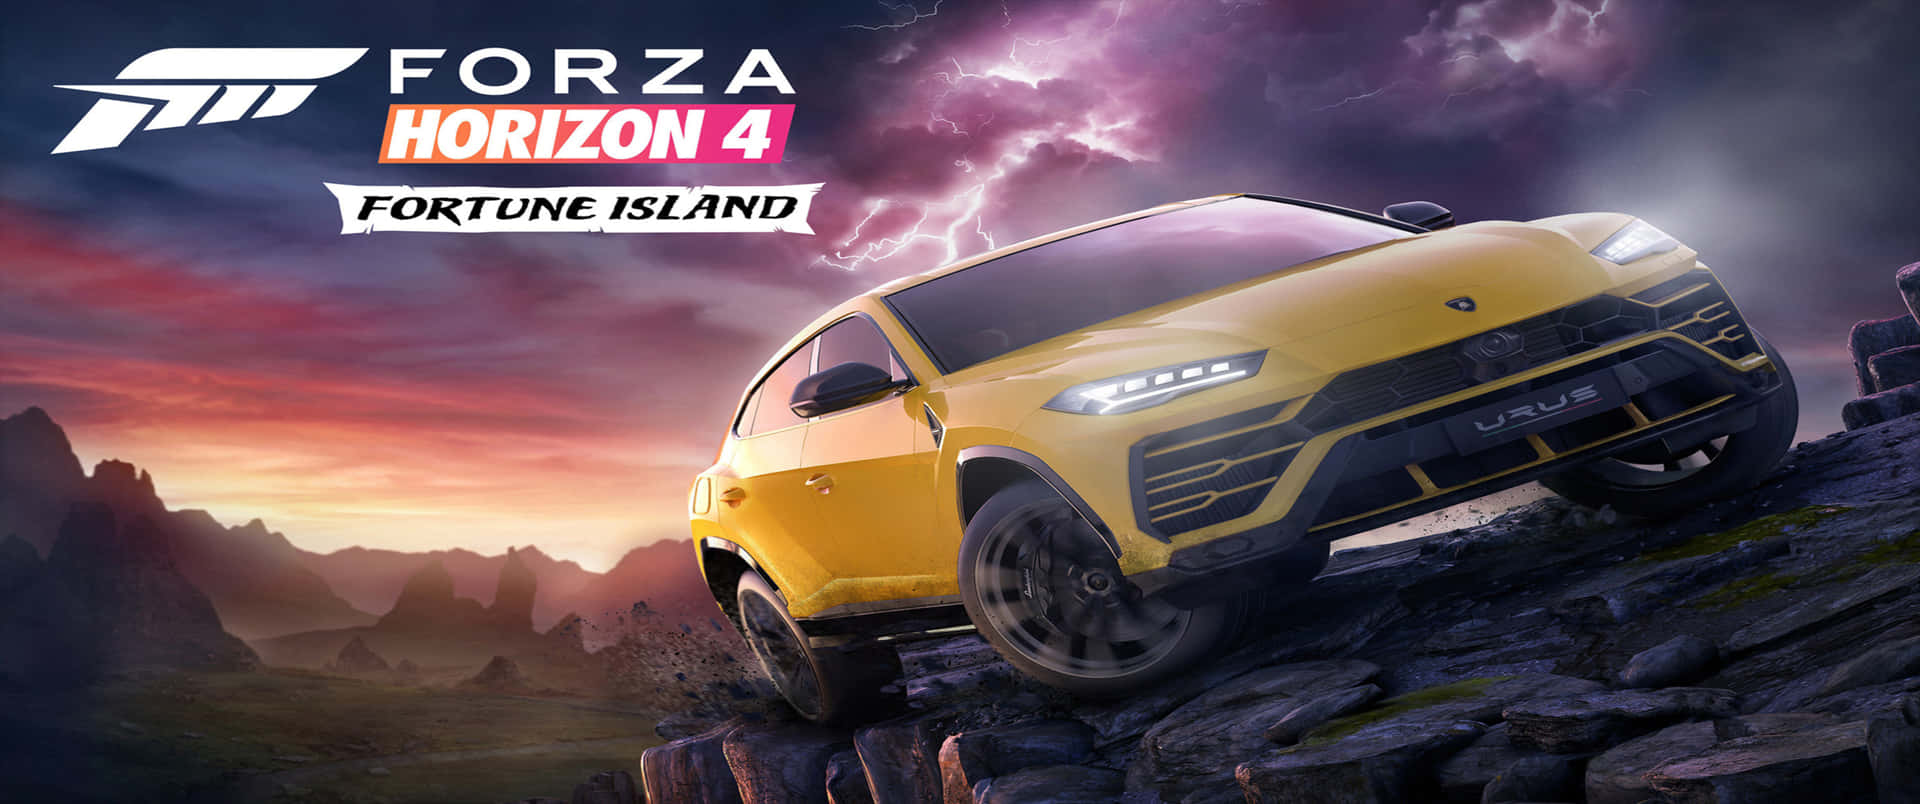 3440x1440p Fortune Island Preview Forza Horizon 4 Background